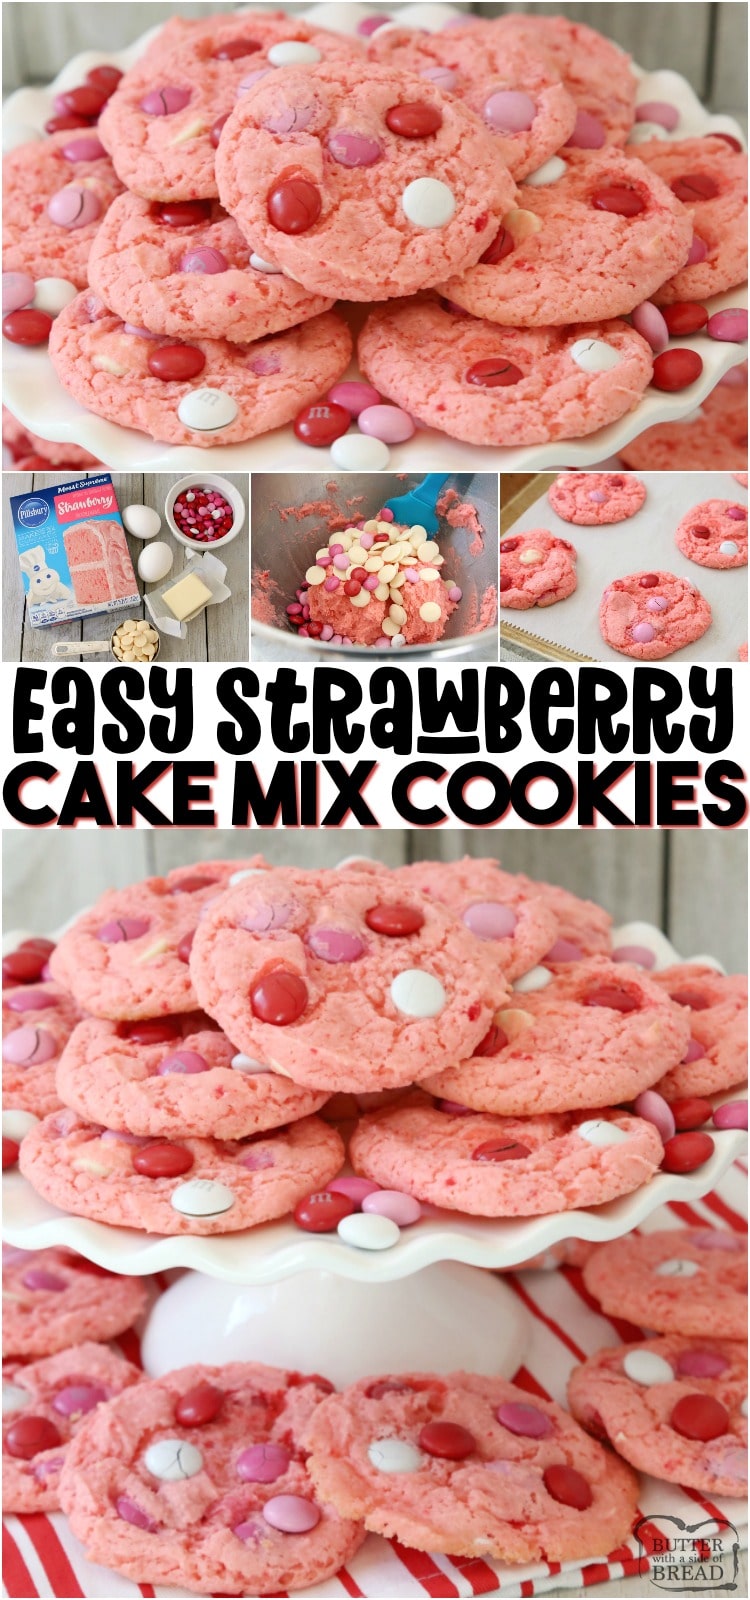 Strawberry Cake Mix Cookies are a soft & sweet cookie made with just 4 simple ingredients! It’s easy to make these flavorful and festive cake mix cookies. #cookies #Valentines #cakemix #softcookies #candy #dessert #baking #recipe from BUTTER WITH A SIDE OF BREAD